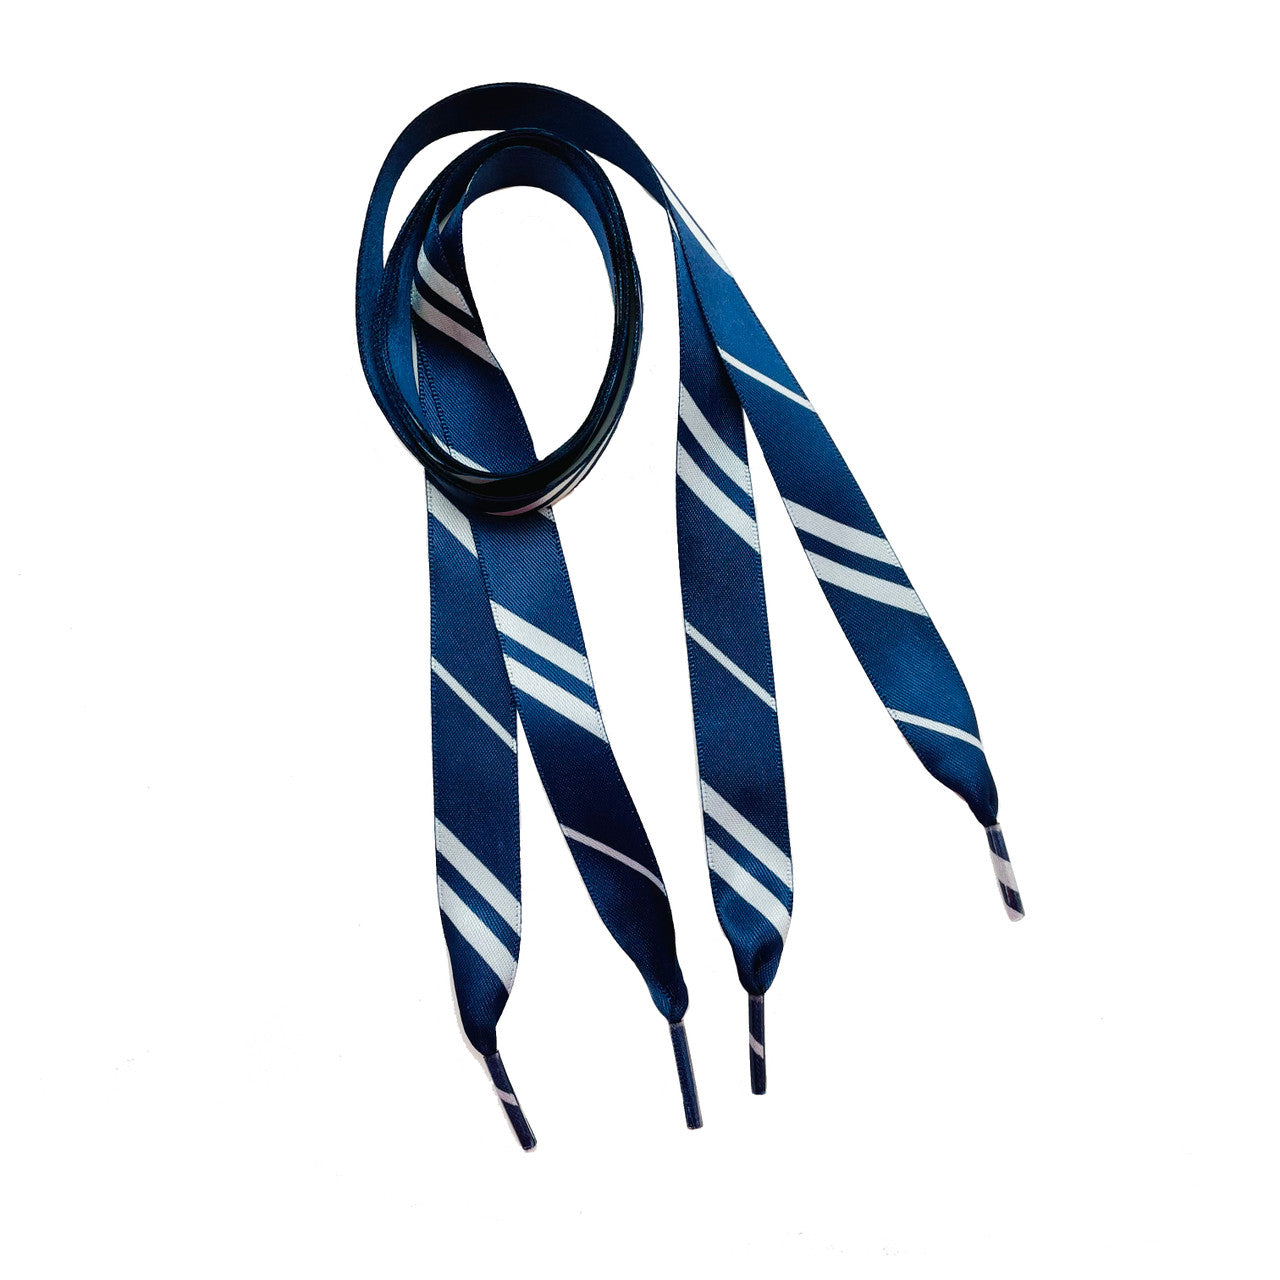 Satin Shoelaces navy blue and silver stripe print ideal for hip hop, dance team, sneaker junkie, cheerleading, wedding, wizard in 36" and 44" lengths